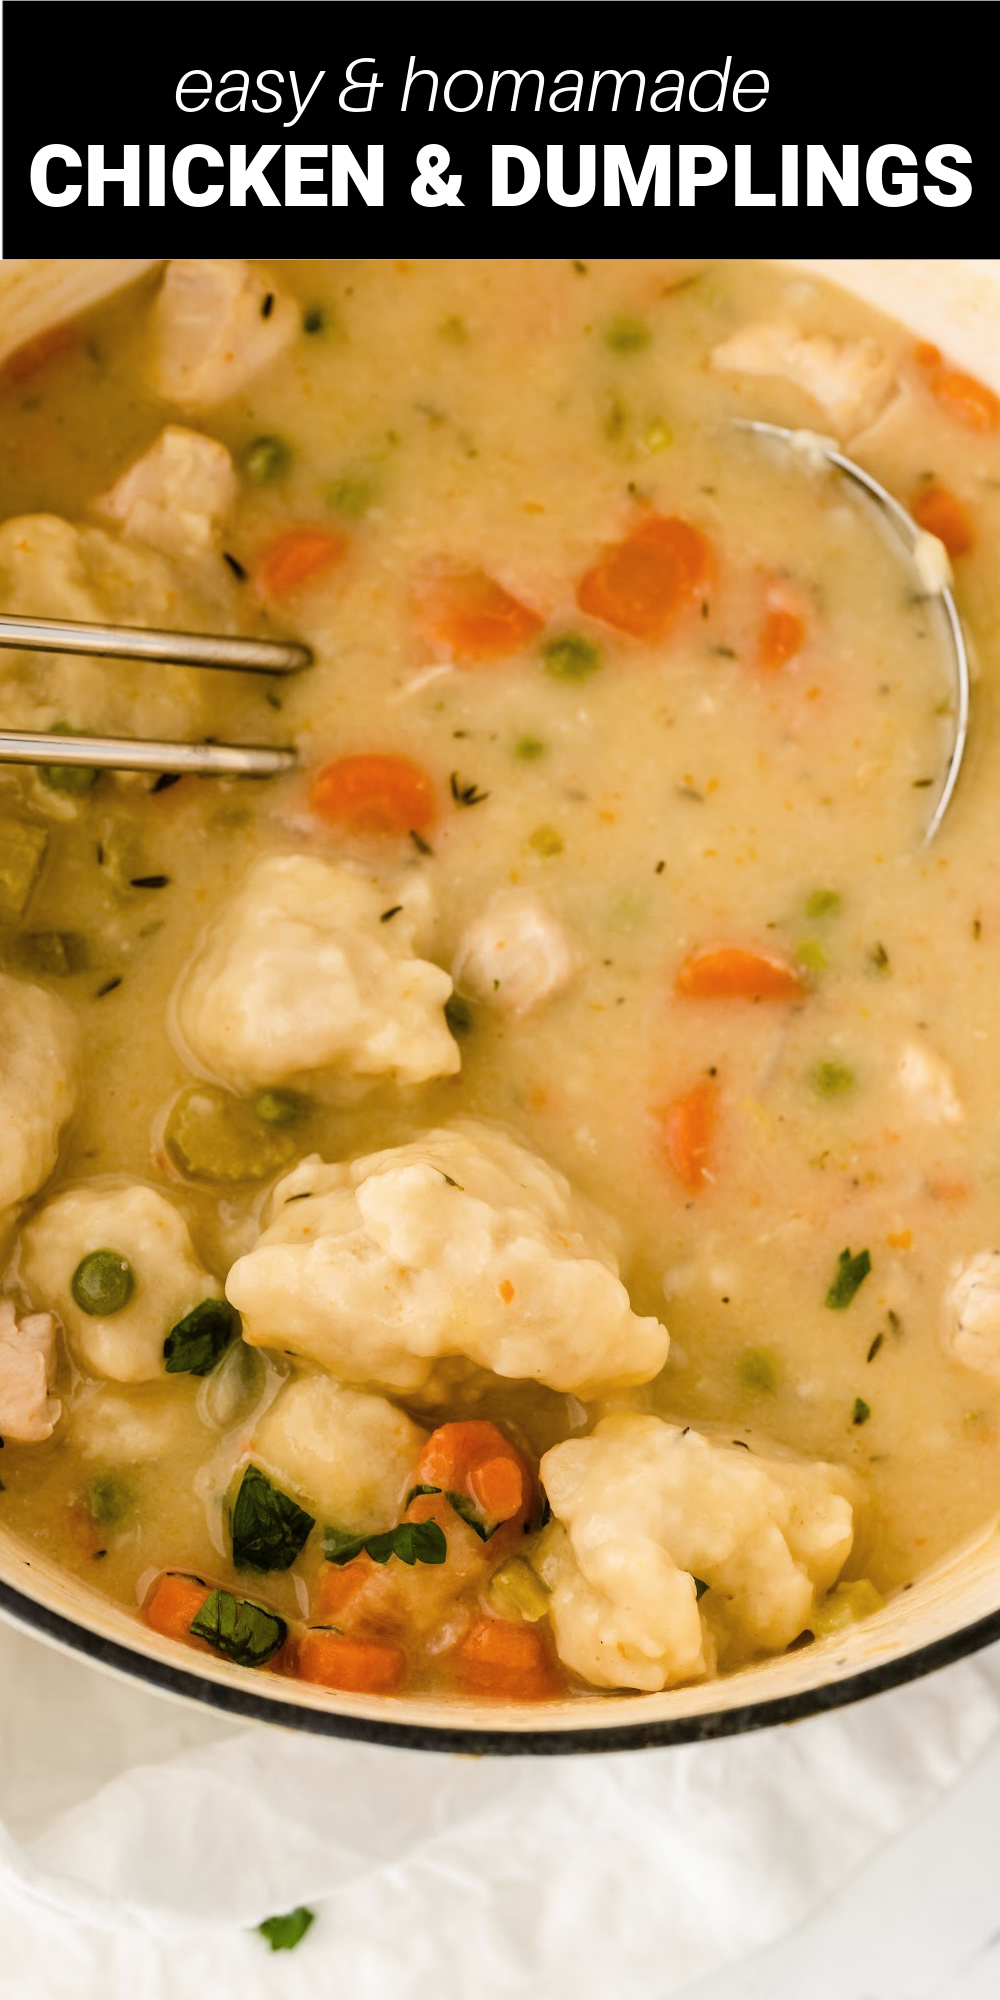 This Southern Homemade Chicken and Dumplings recipe is comfort food at its finest. Juicy chicken and tender vegetables simmer away in a rich and creamy broth with fluffy homemade dumplings. It just doesn’t get any better than this!